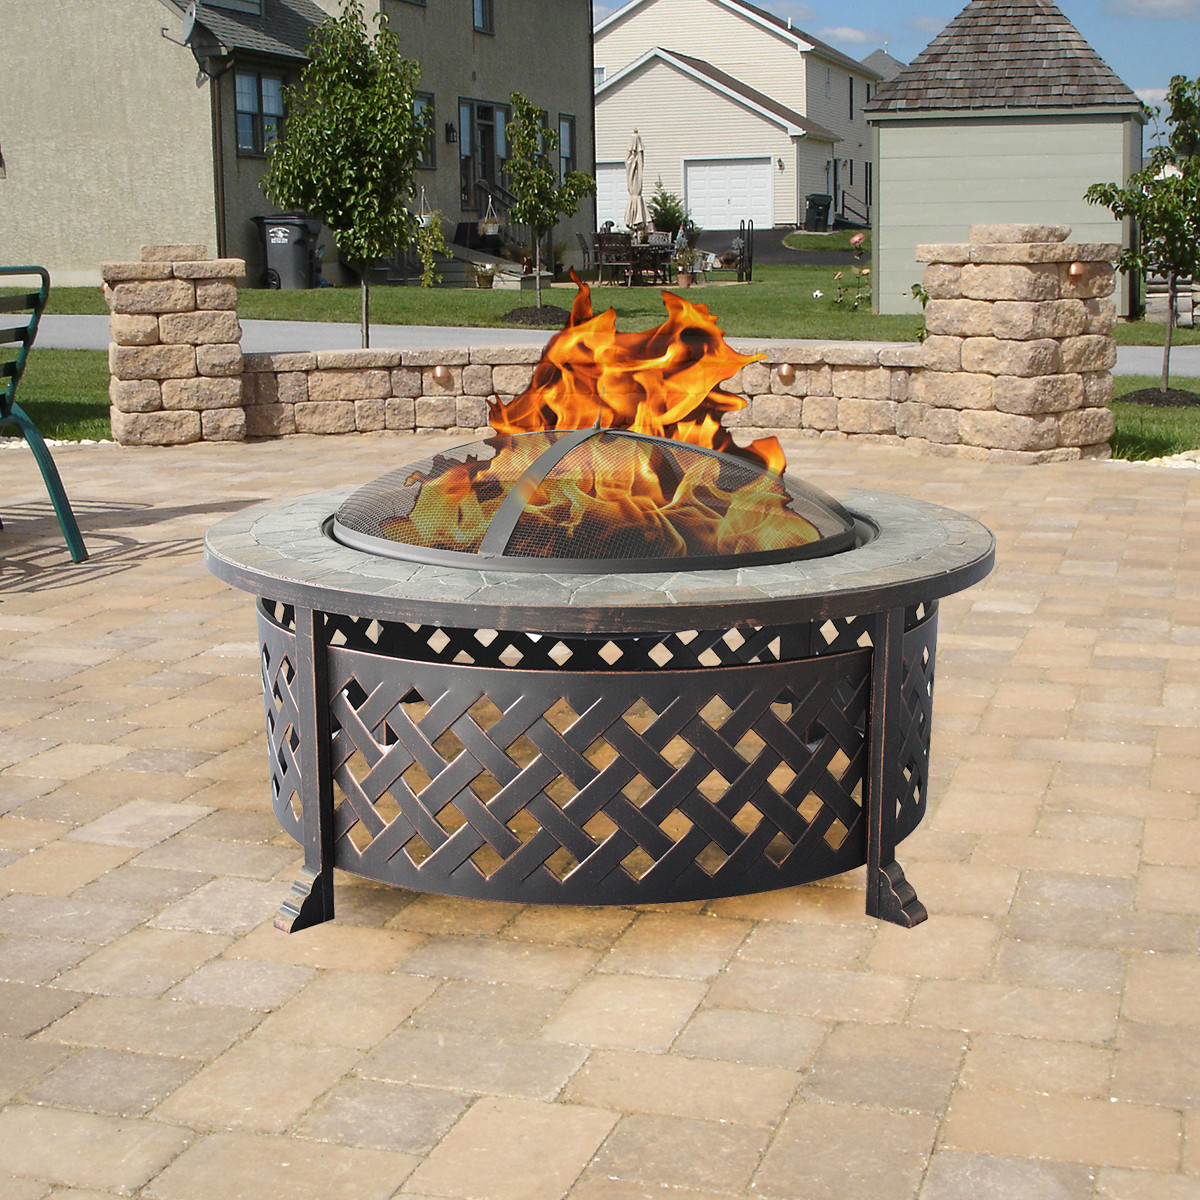 Outdoor Metal Fire Pit
 Clevr Outdoor 34" Metal Firepit Table Backyard Patio